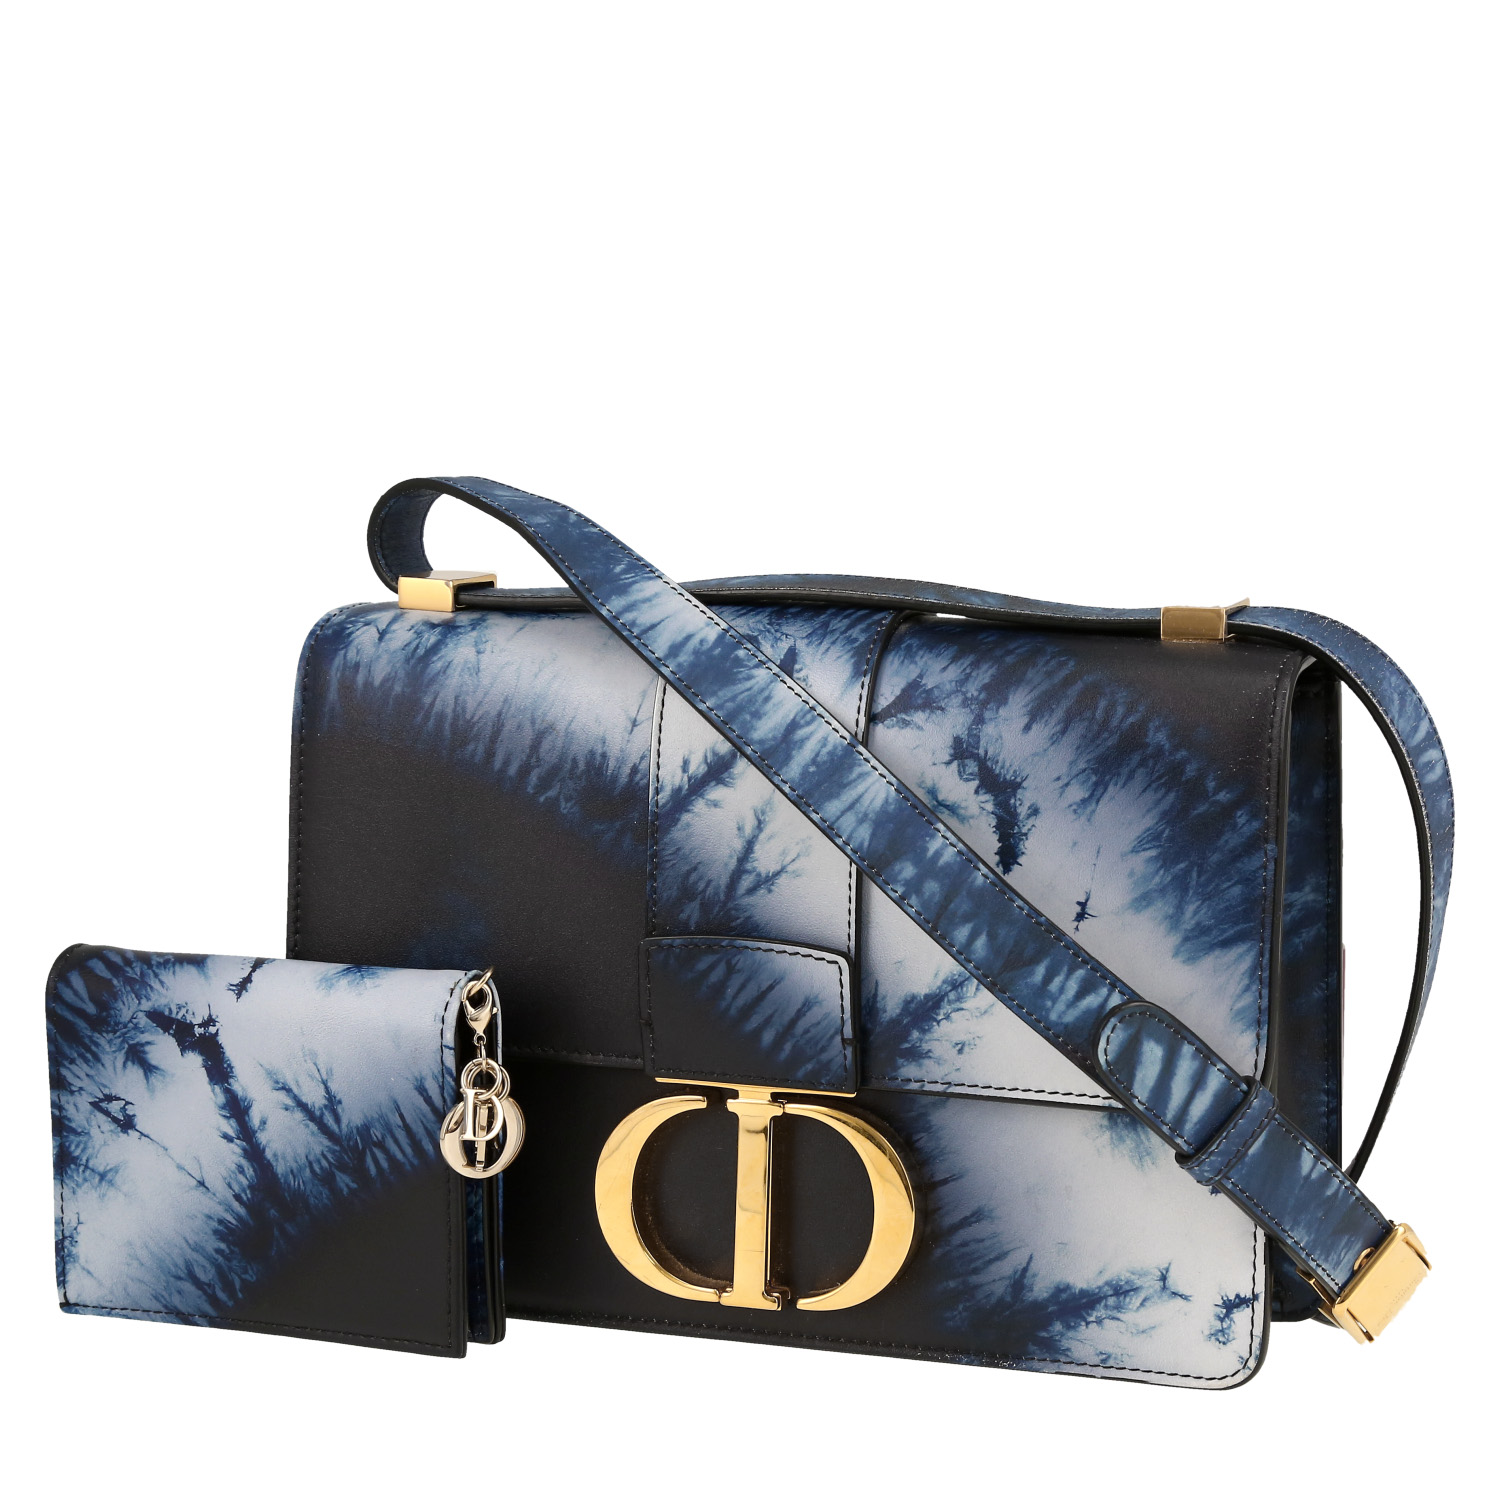 30 Montaigne Shoulder Bag In Black And Blue Leather